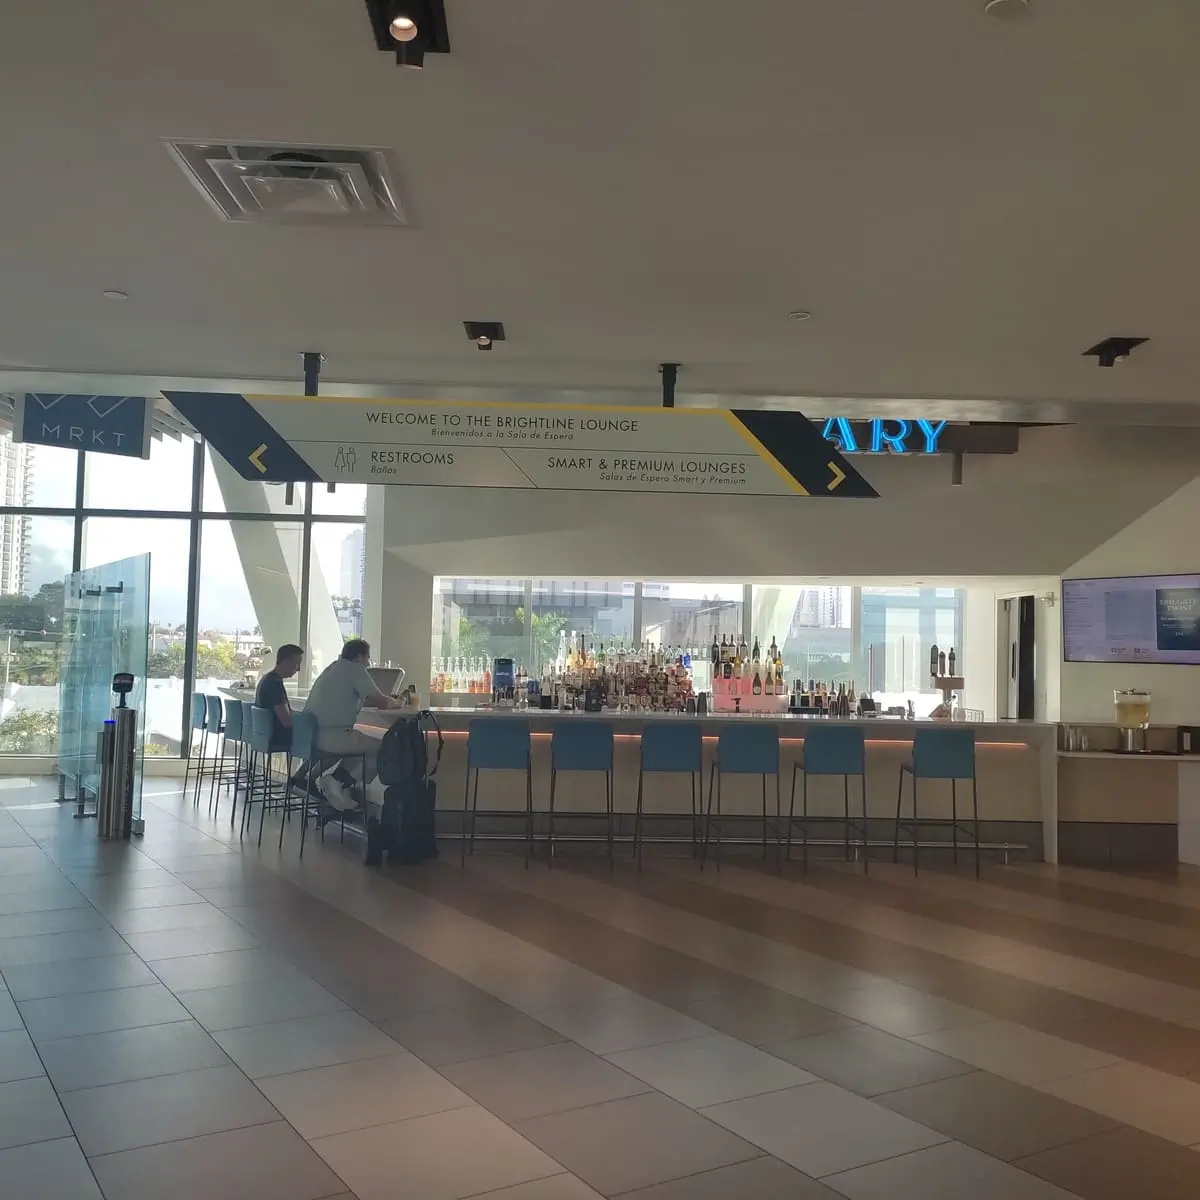 A small bar sells drinks upstairs next to the lounges inside the Brightline station